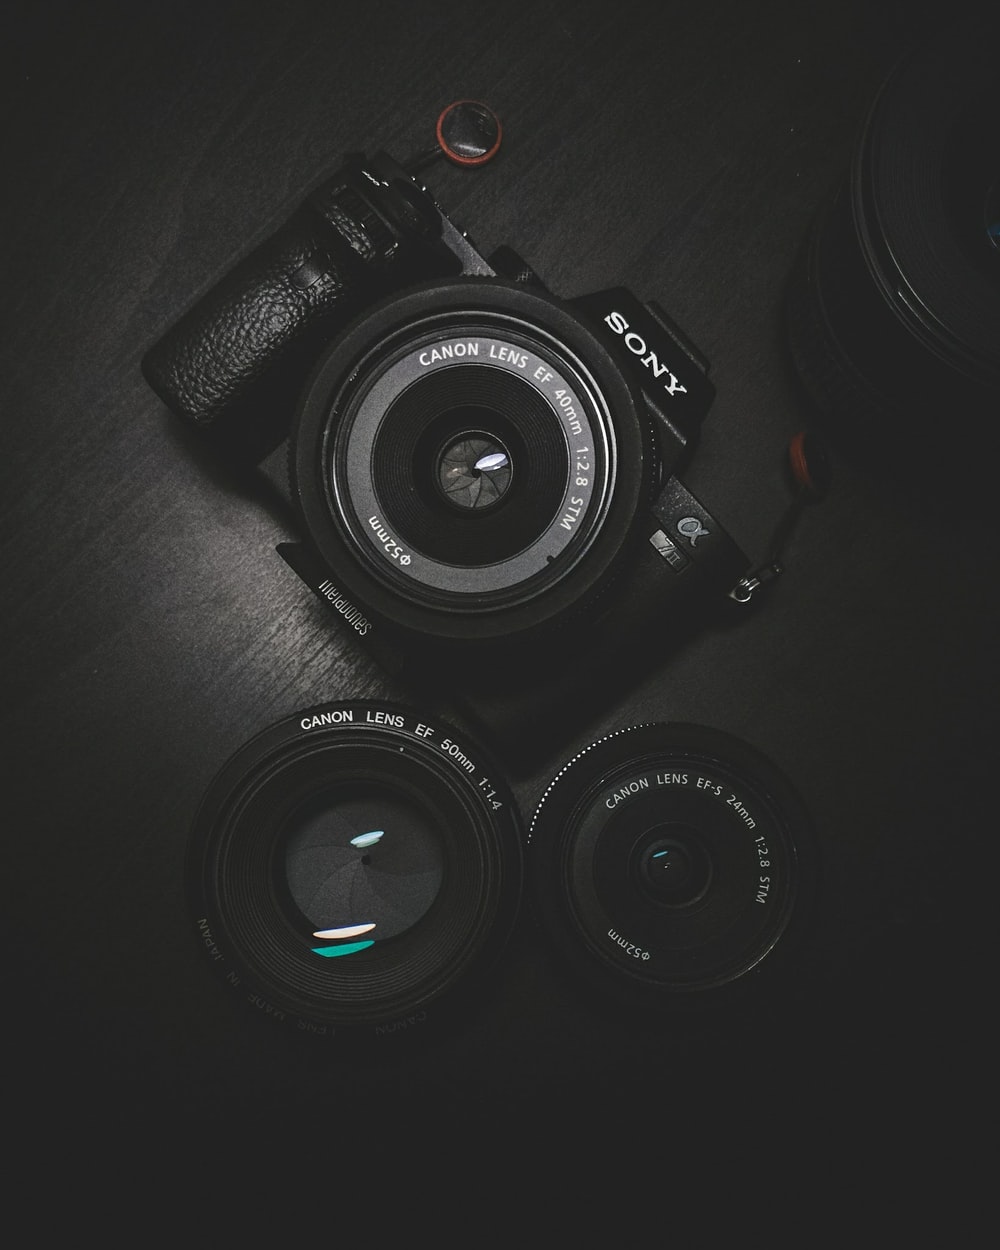 Sony Alpha A7Iii Picture [HD]. Download Free Image